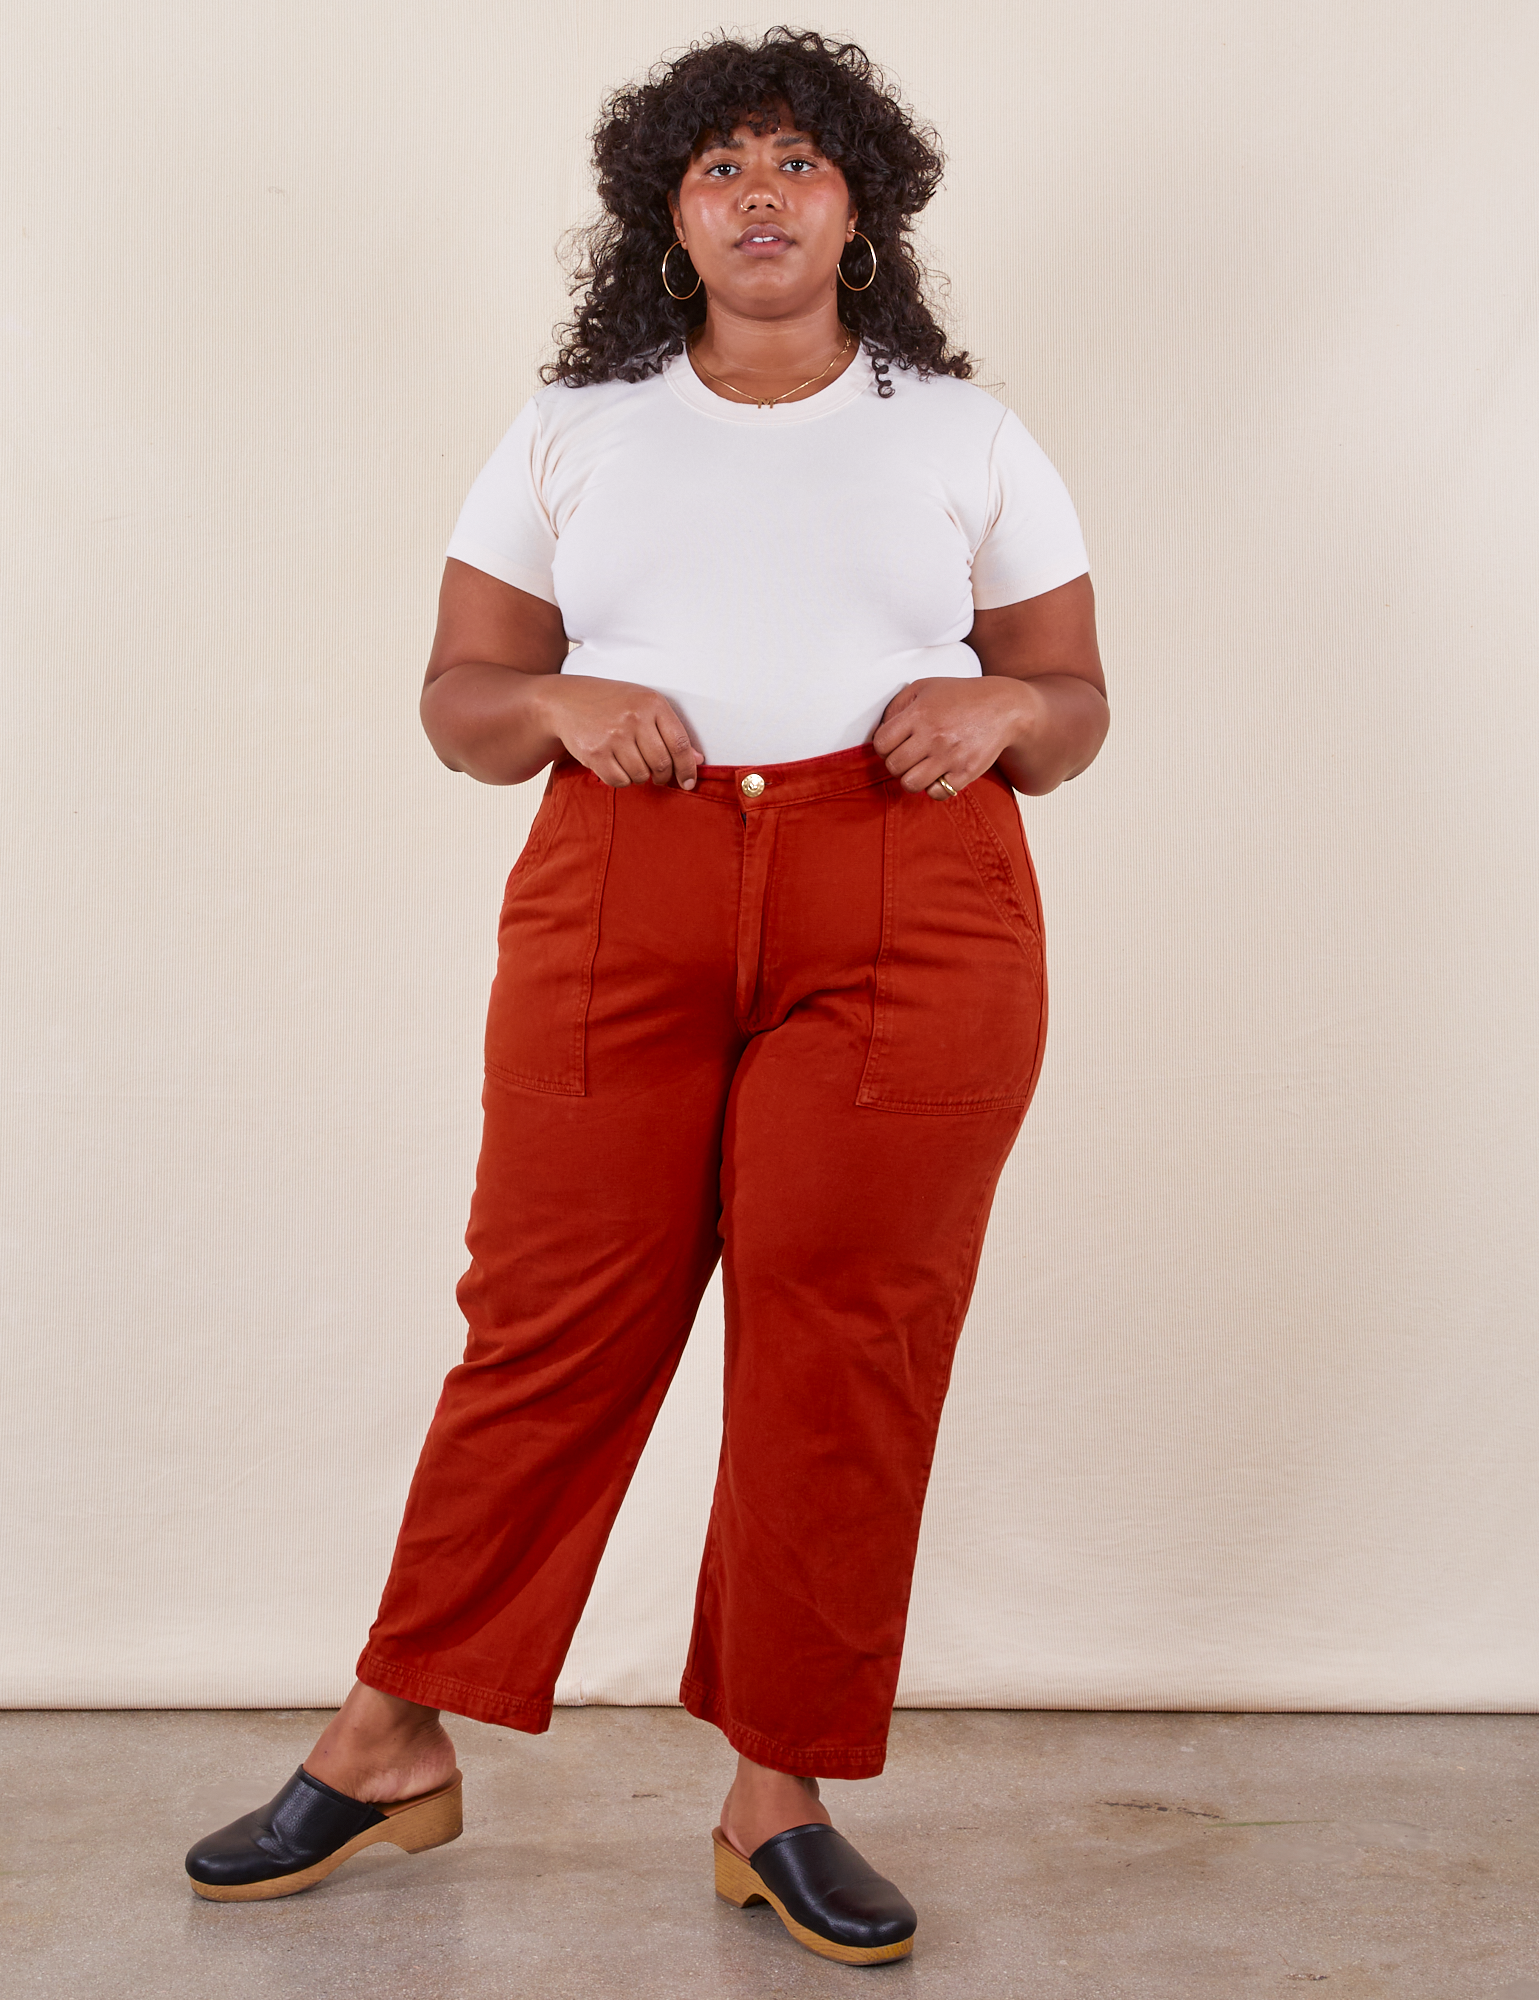 Morgan is 5&#39;5&quot; and wearing Petite 1XL Work Pants in Paprika paired with a Baby Tee in  vintage tee off-white